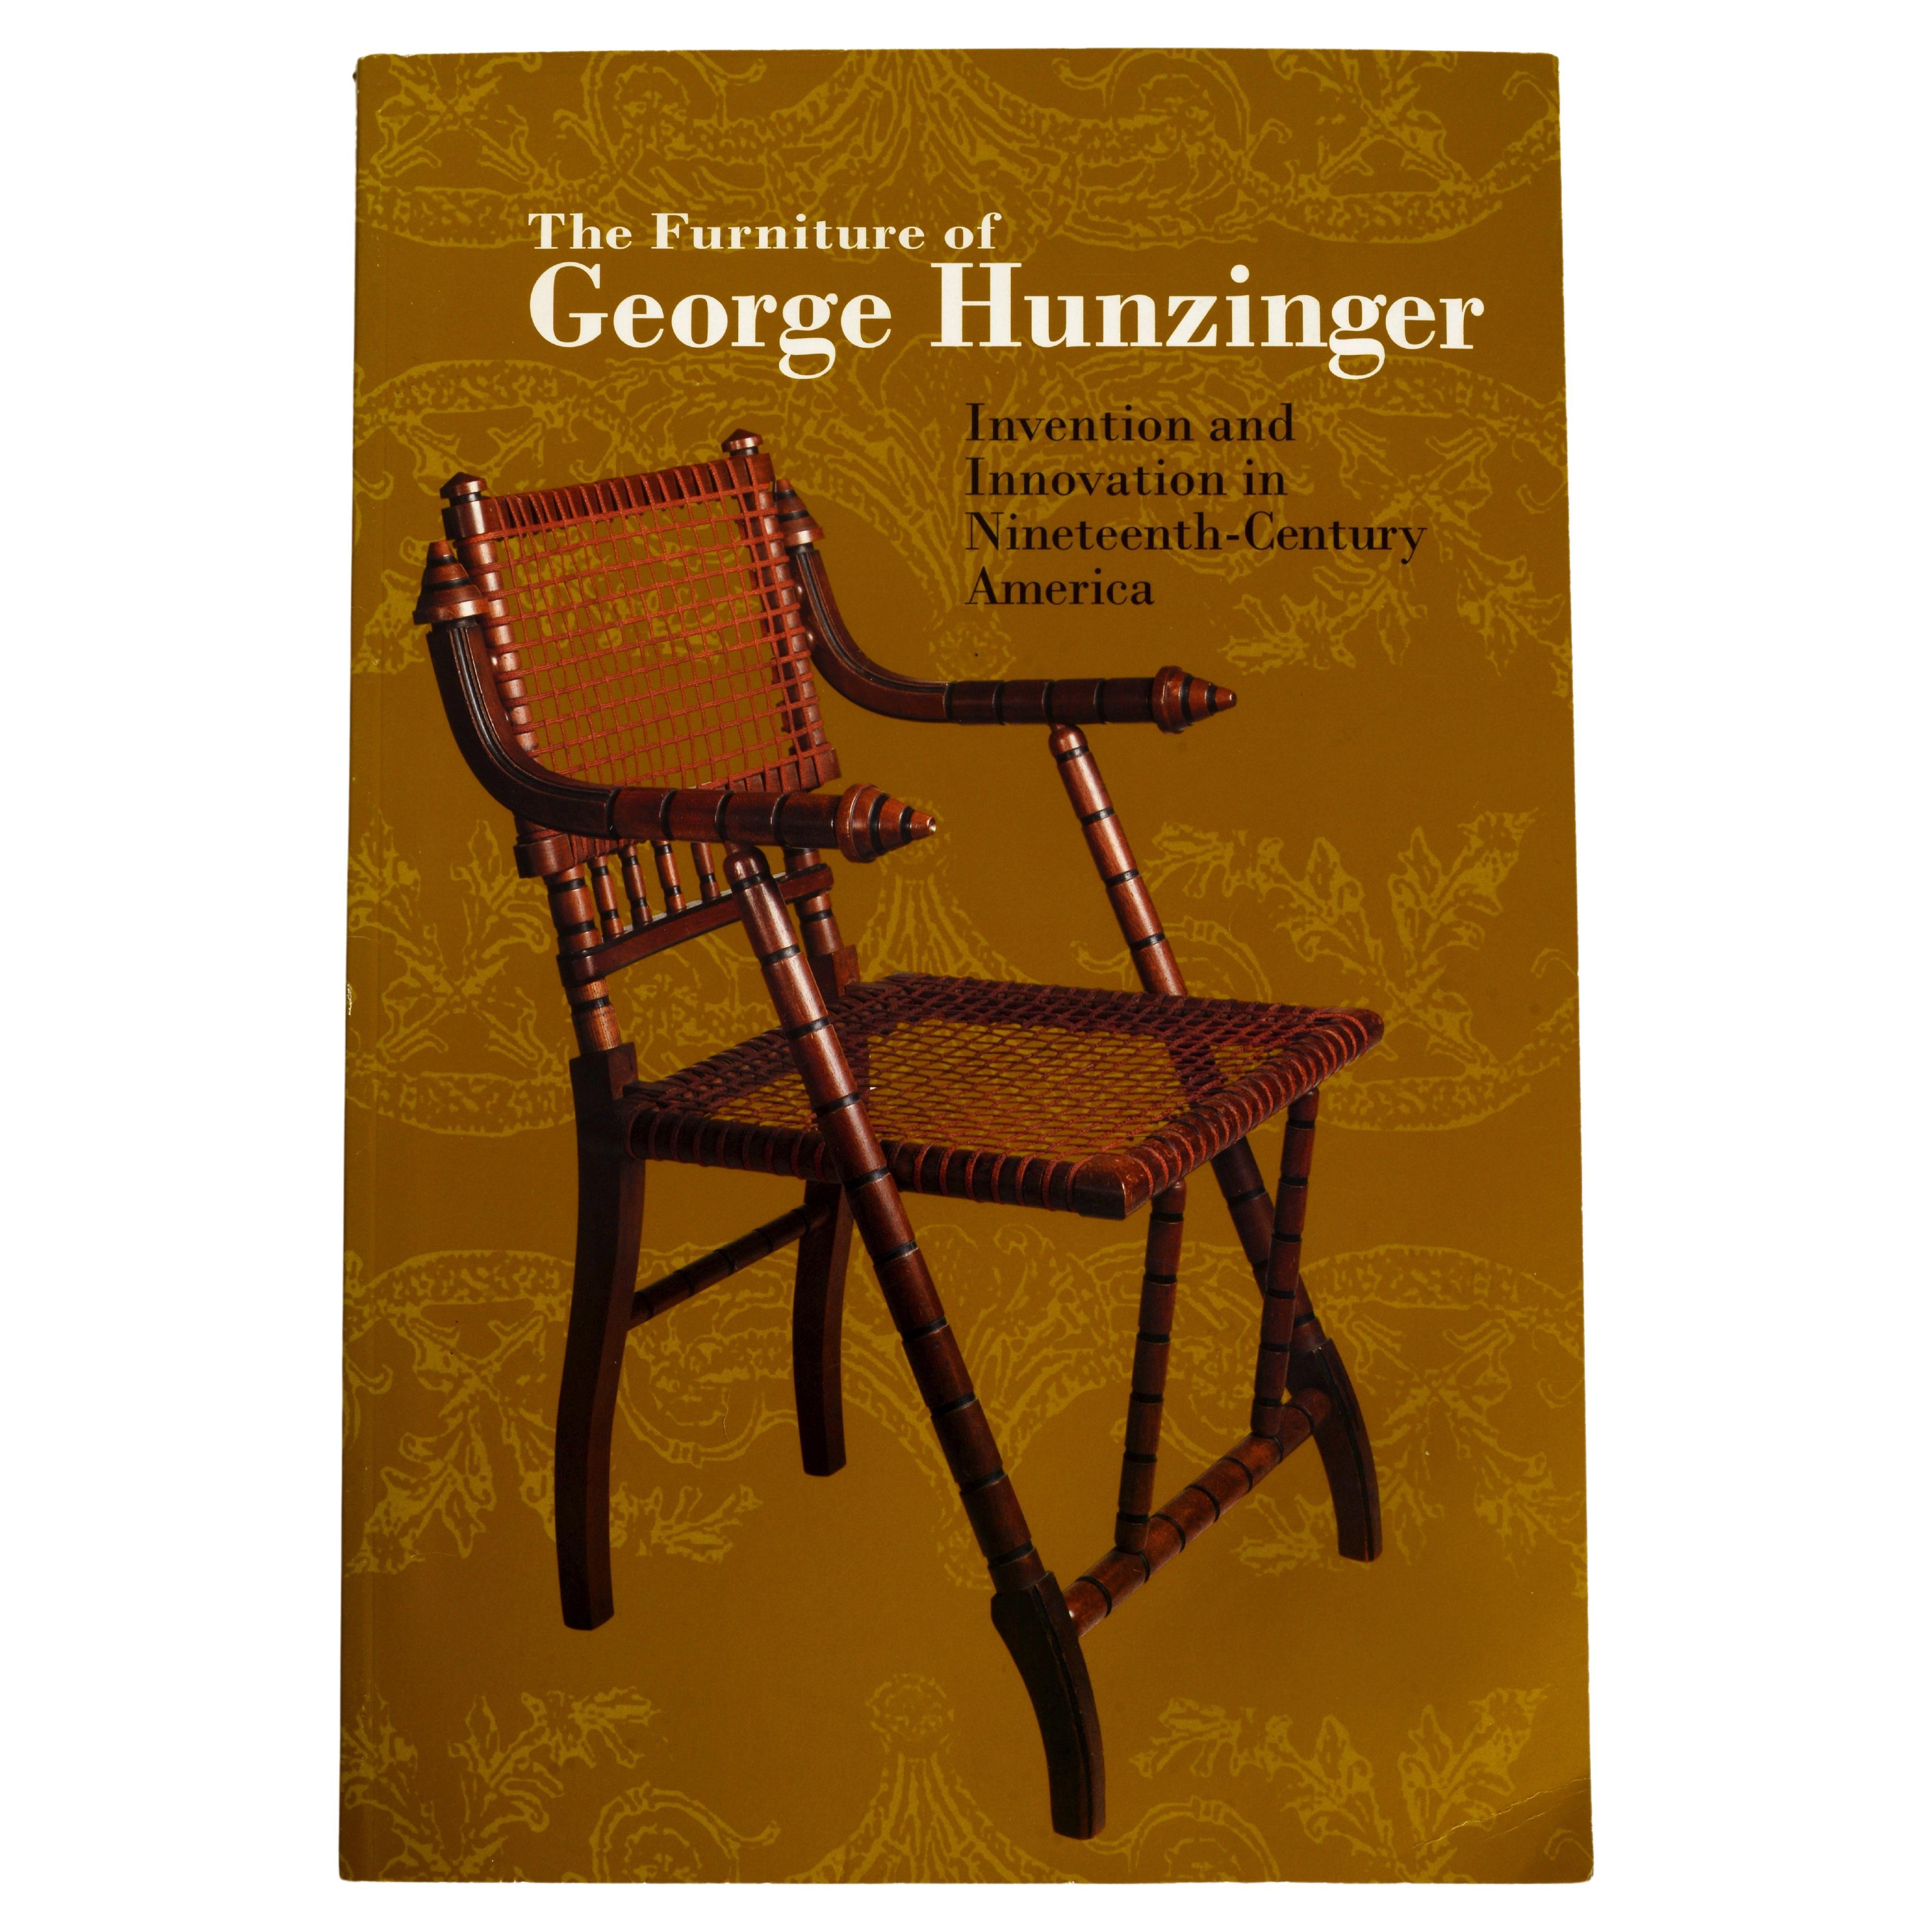 Furniture of George Hunzinger: Invention & Innovation in 19th-Century America